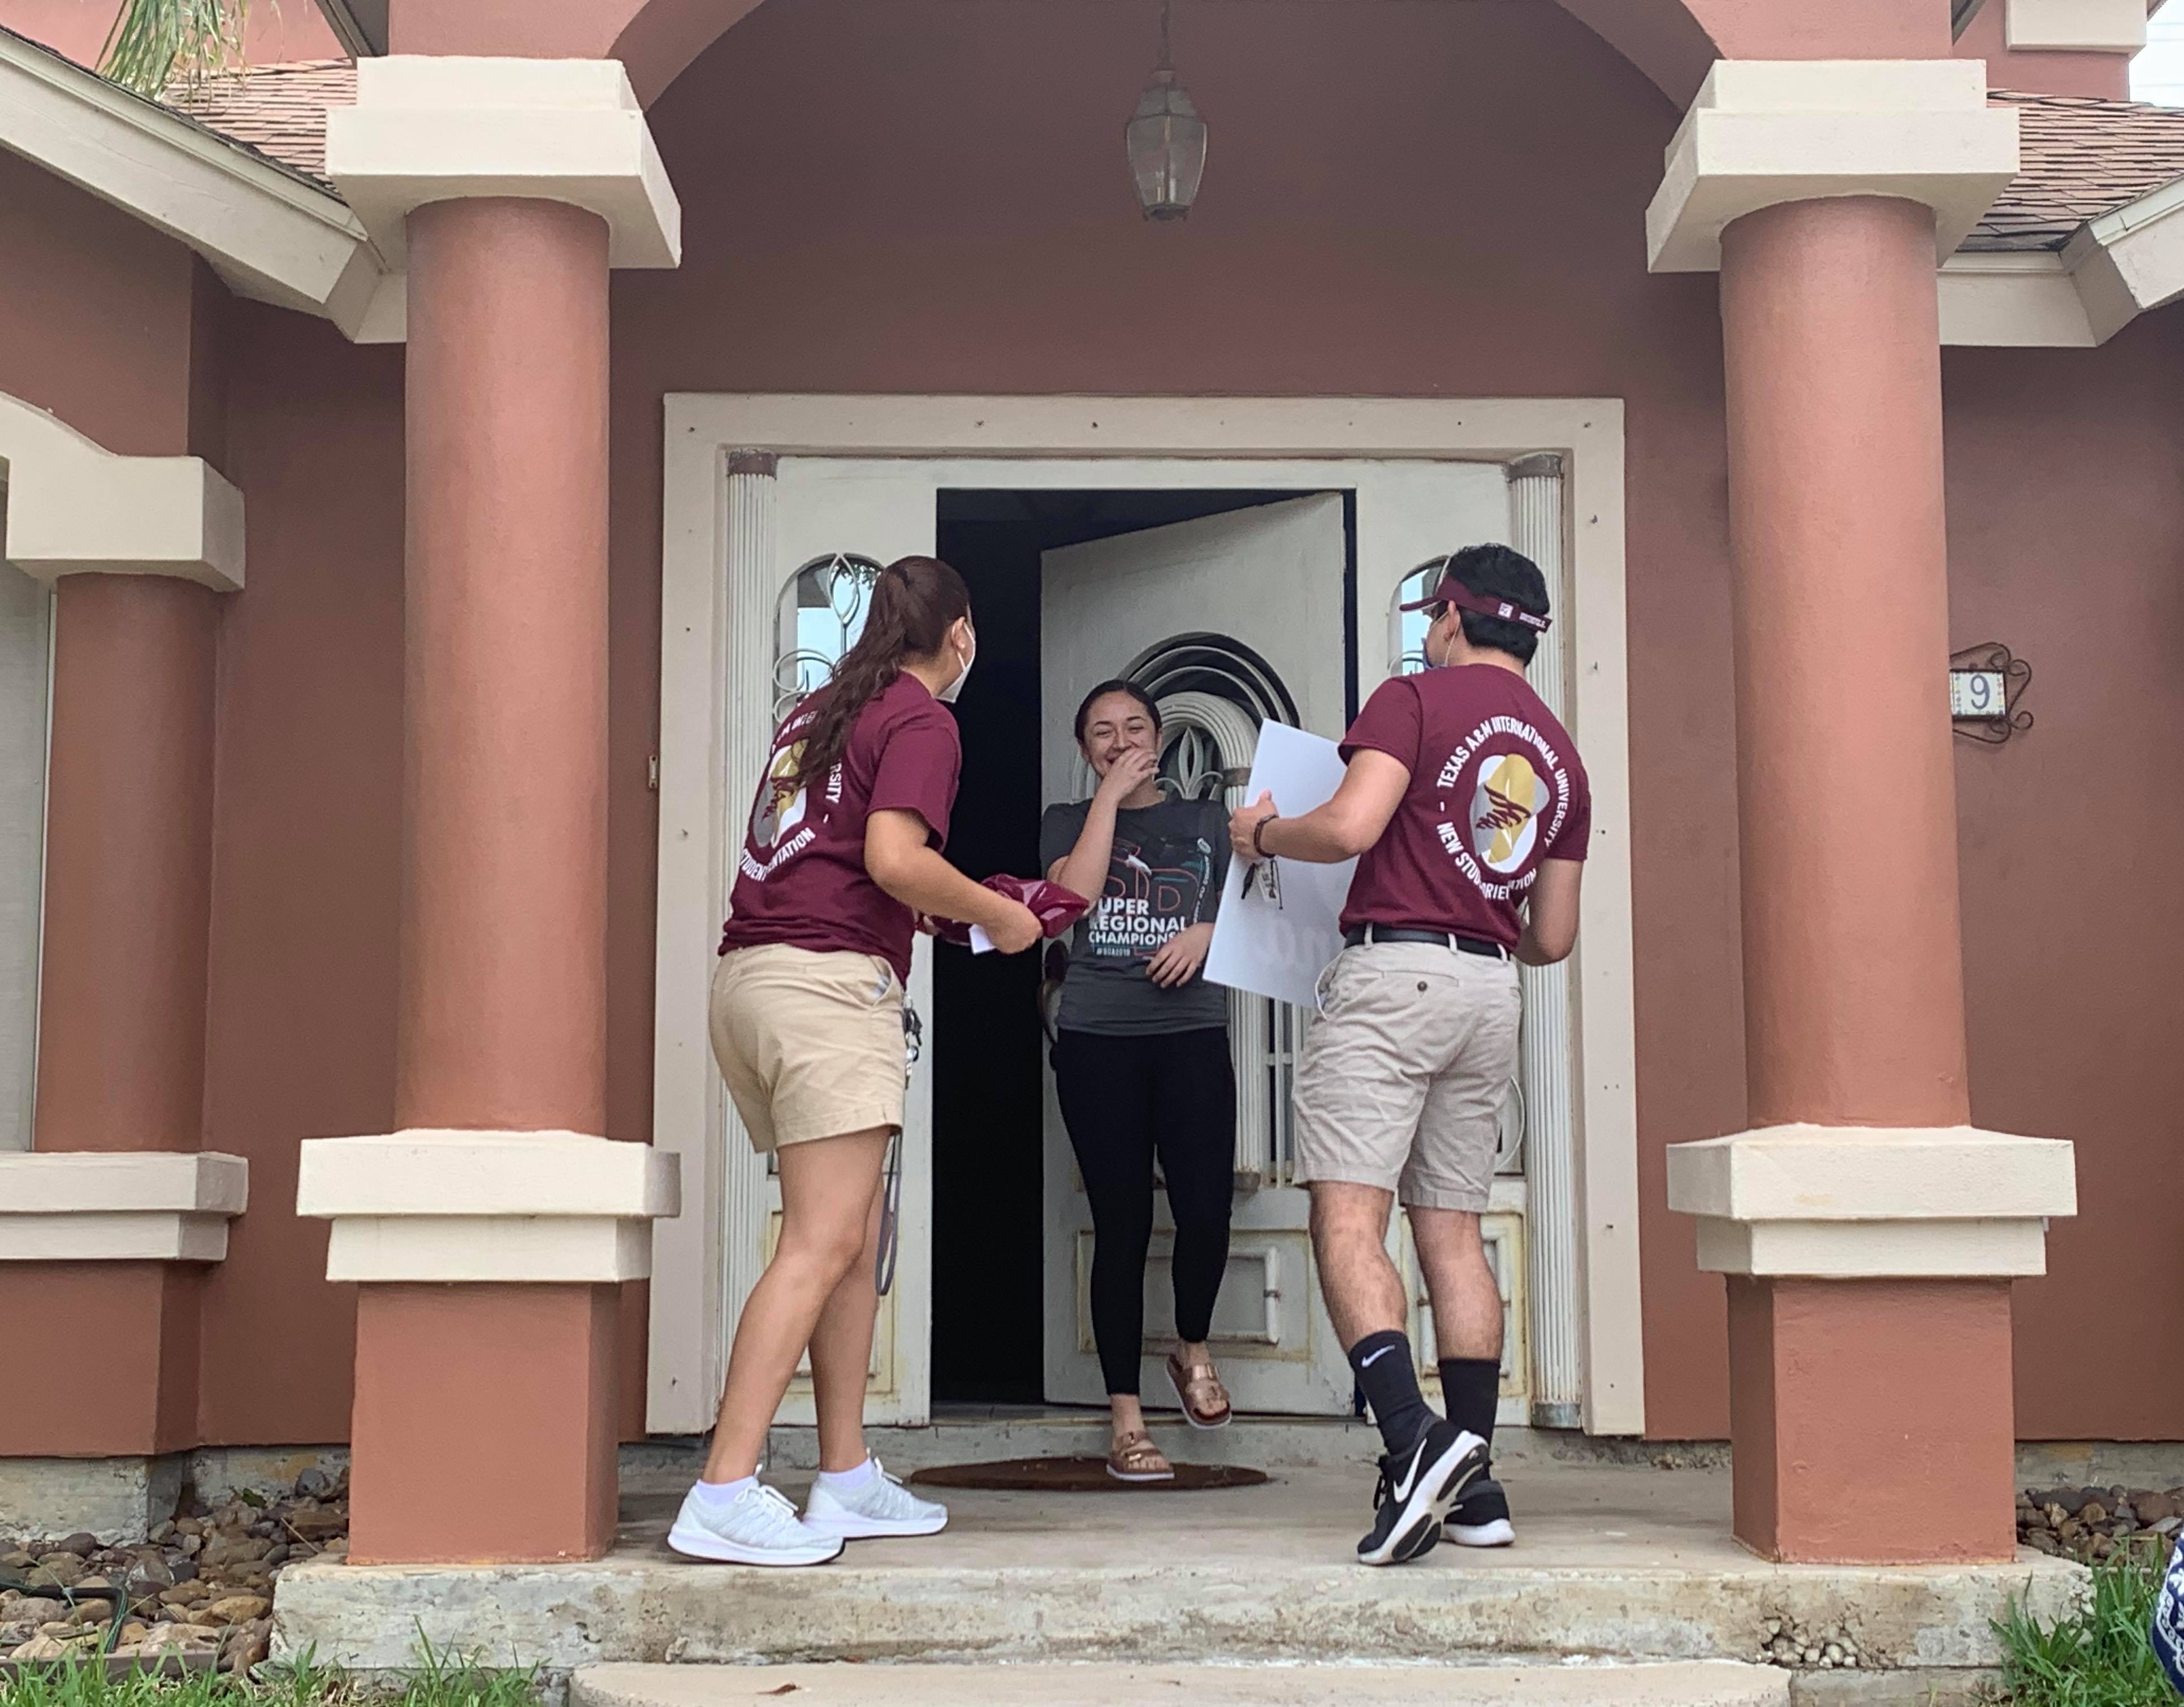 Texas A&M International University freshman student Maria Espericueta (center) was in for a surprise after New Student Orientation Leaders Yamile Vasquez (left) and Daniel Perez (right) brought a welcome packet and lawn sign to her home.